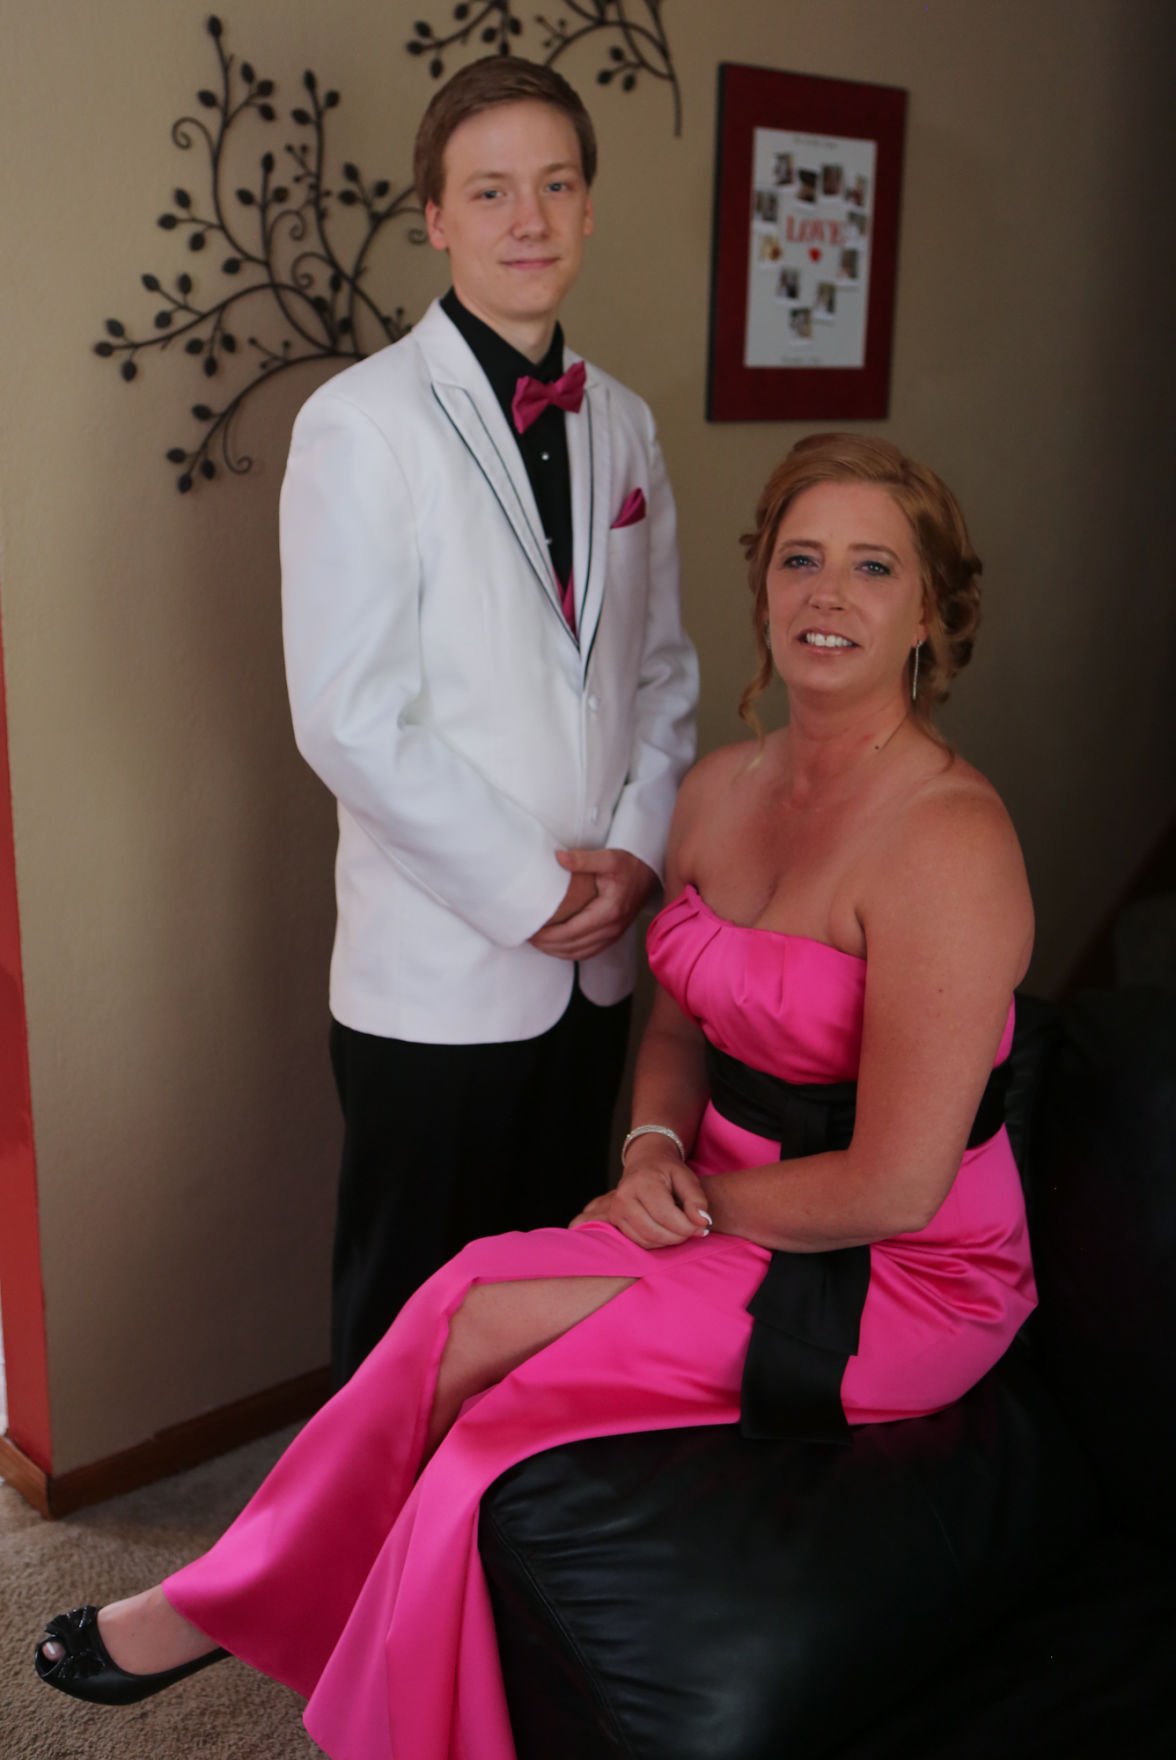 Gallery Son Takes Mom To Valpo Prom Local Photo Galleries